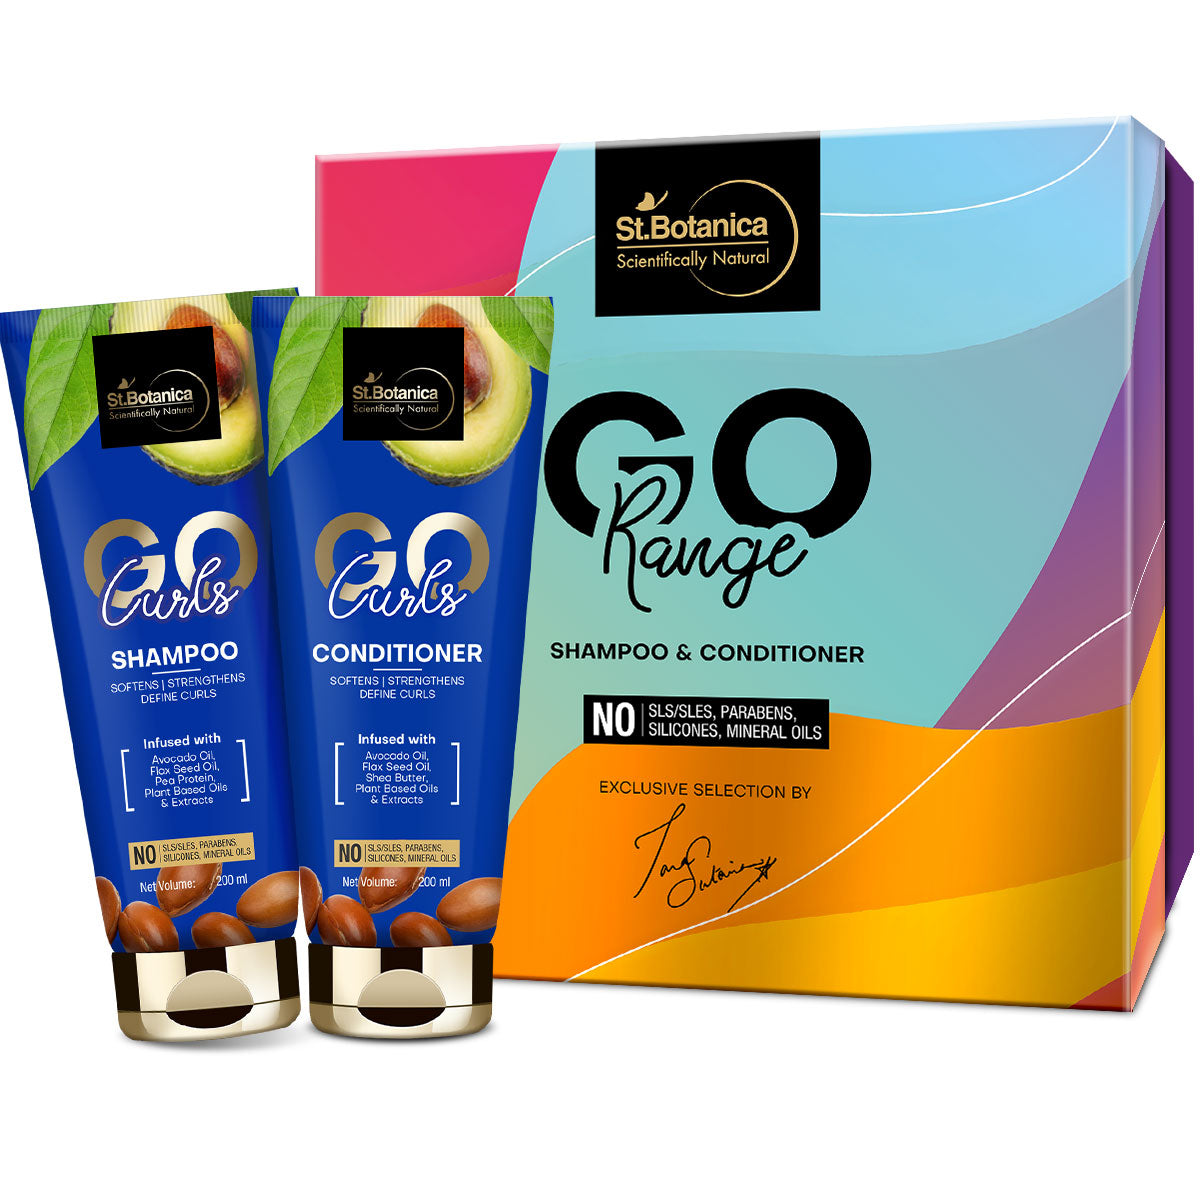 St.Botanica Go Curl Shampoo + Conditioner For Curly Hair, 200ml Each, No SLS/Sulphate, Paraben, Silicones, Colors